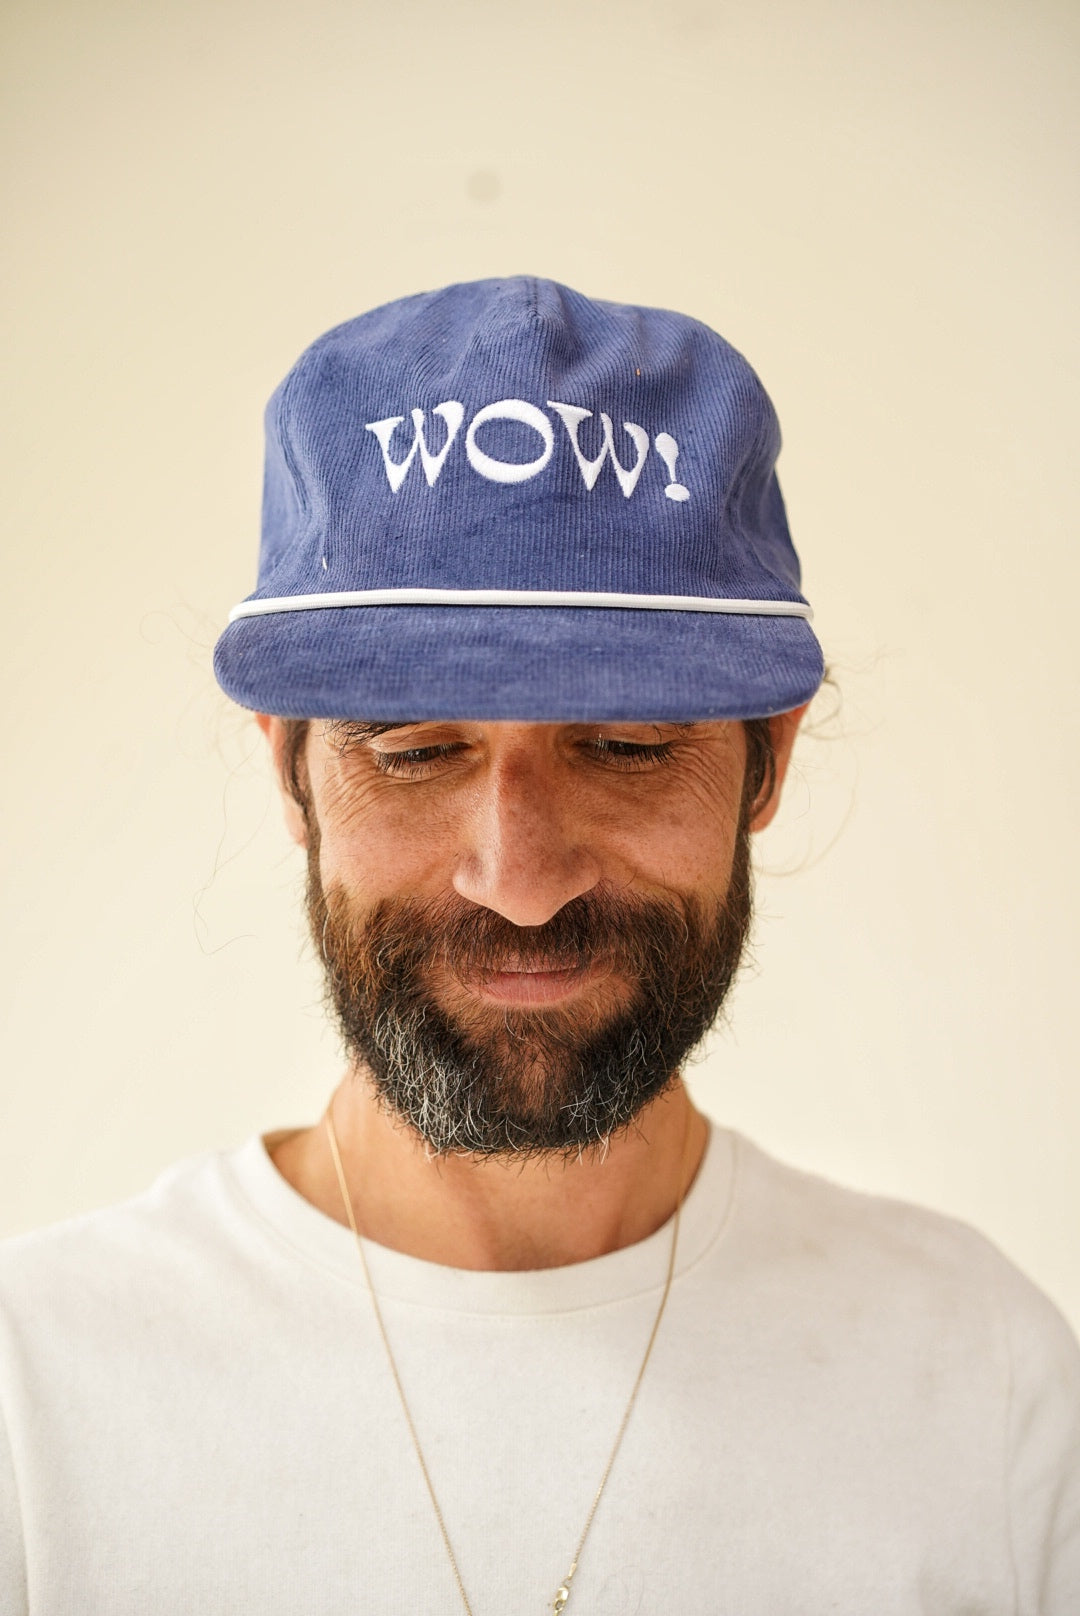 &#39;Wow!’ Cord Hat